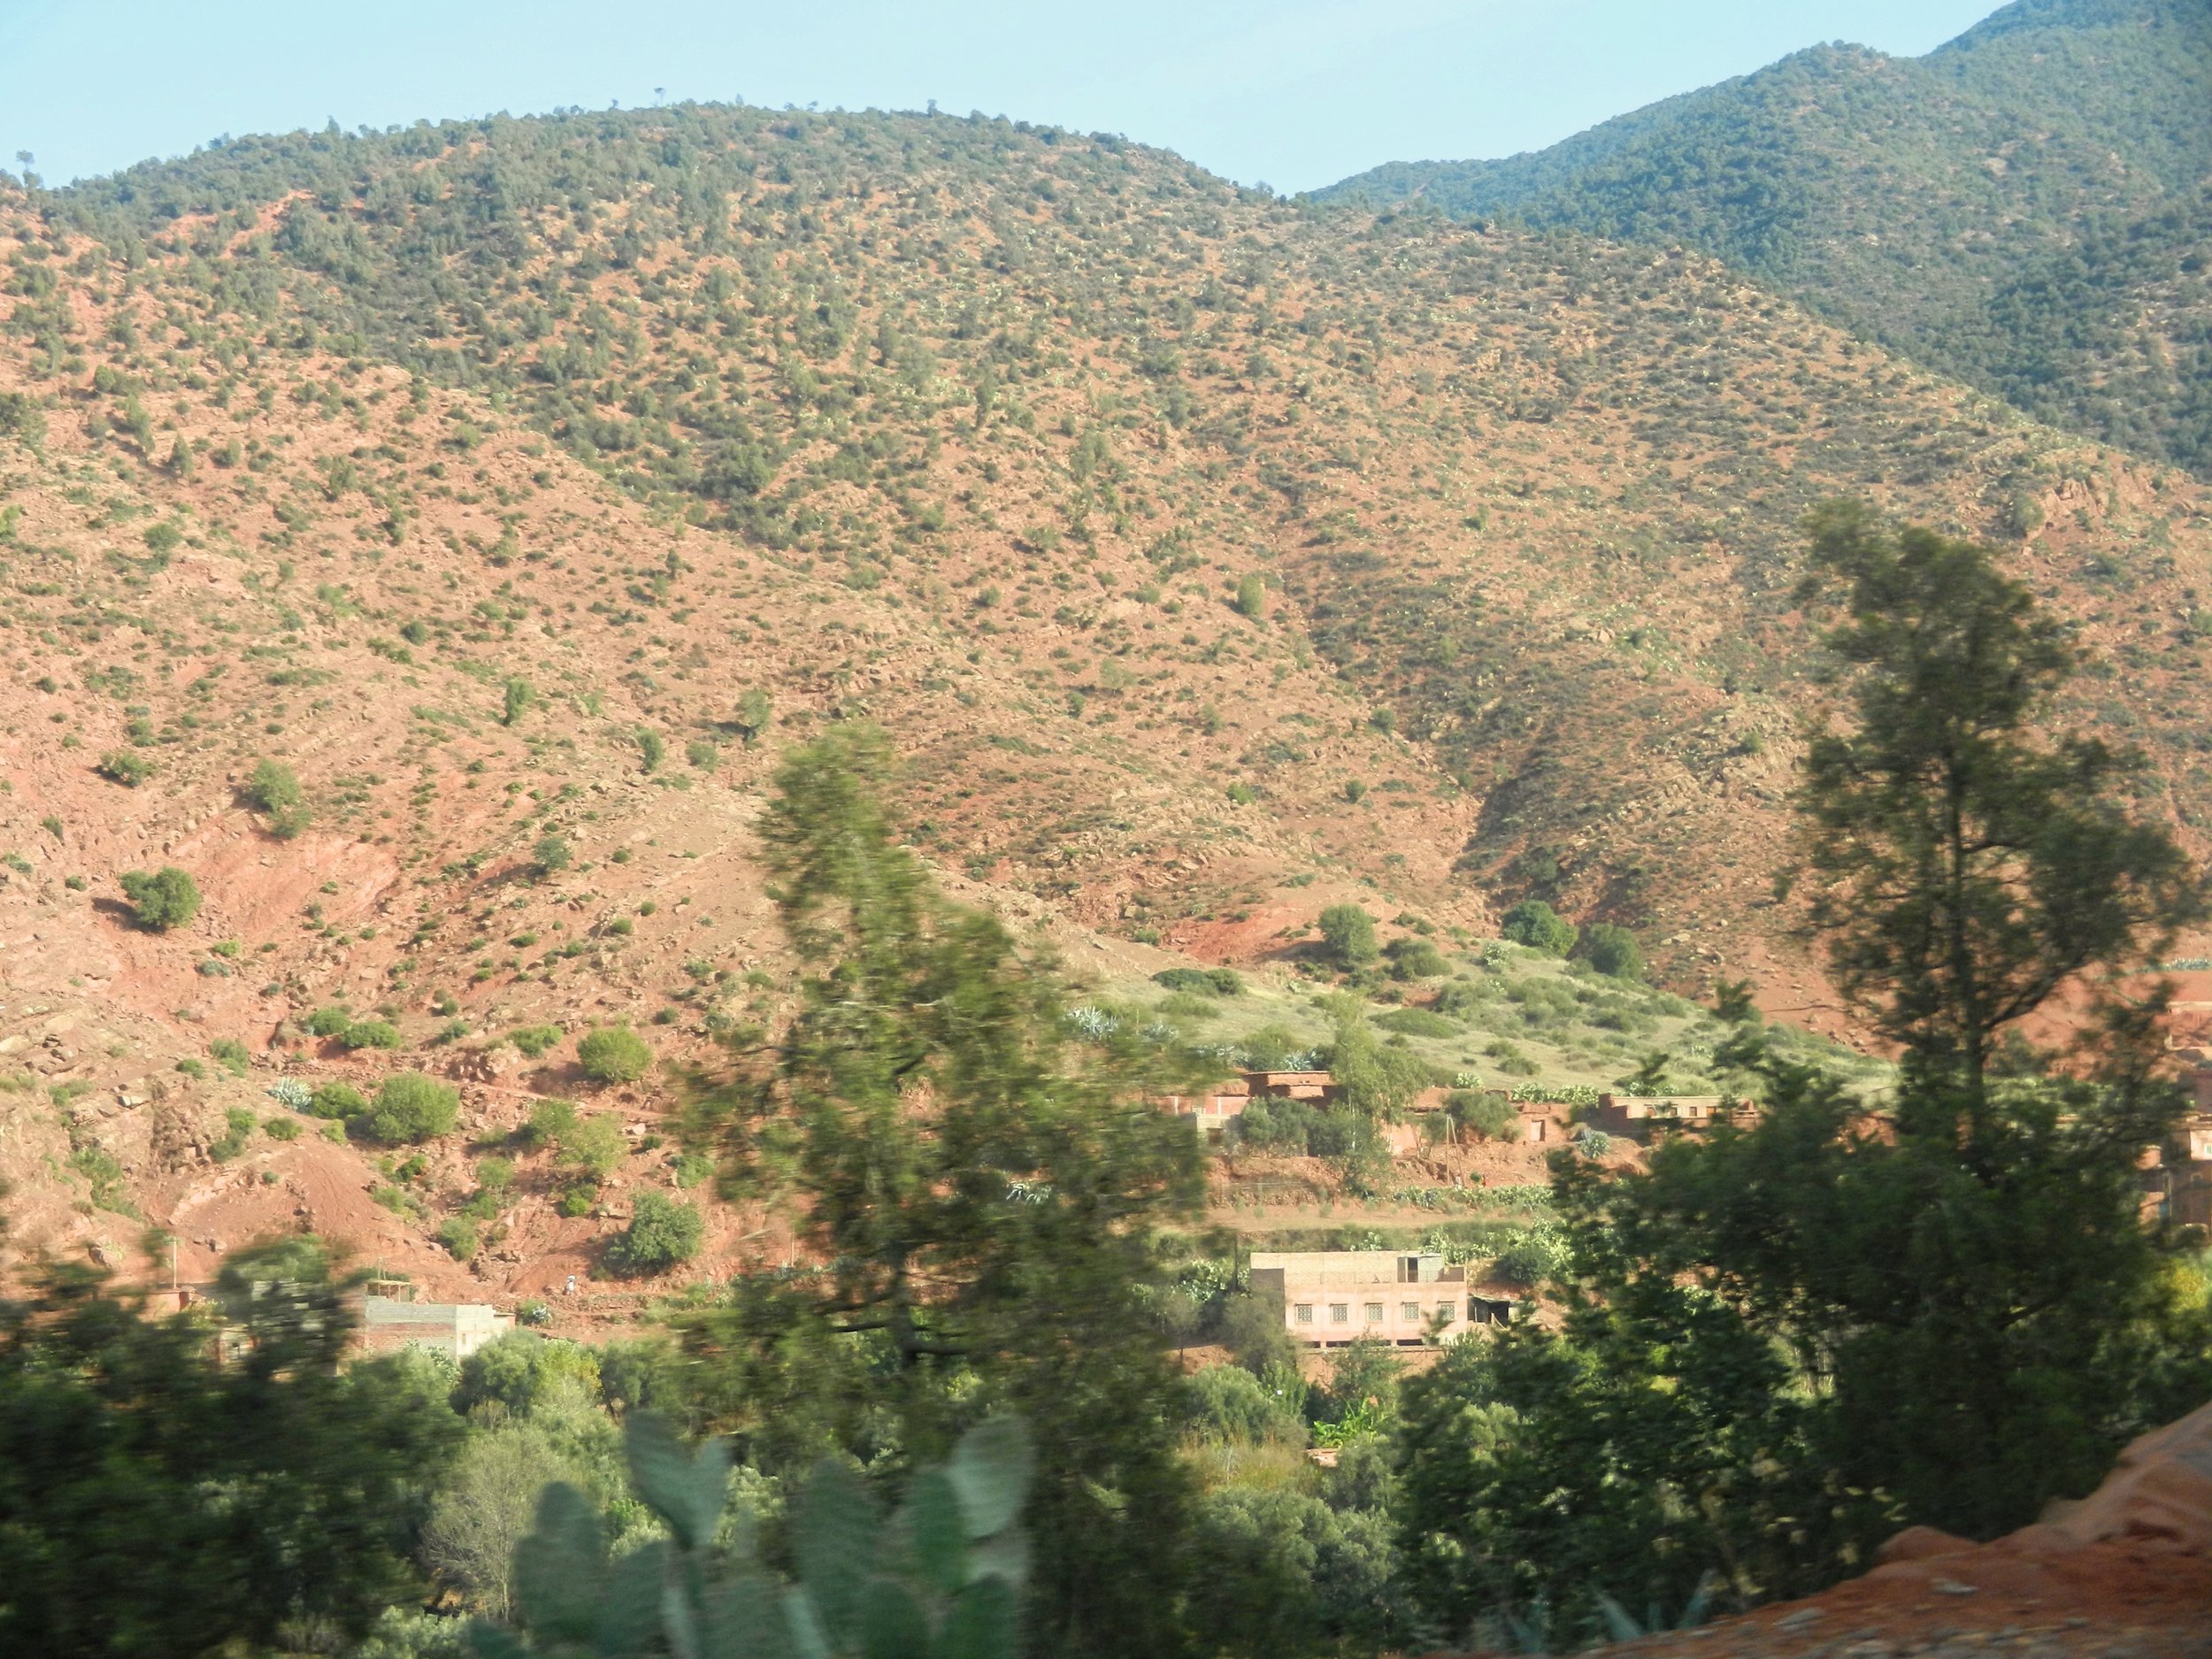 Drive to the Vallee de l'ourika near Marrakesh, Morocco.jpg